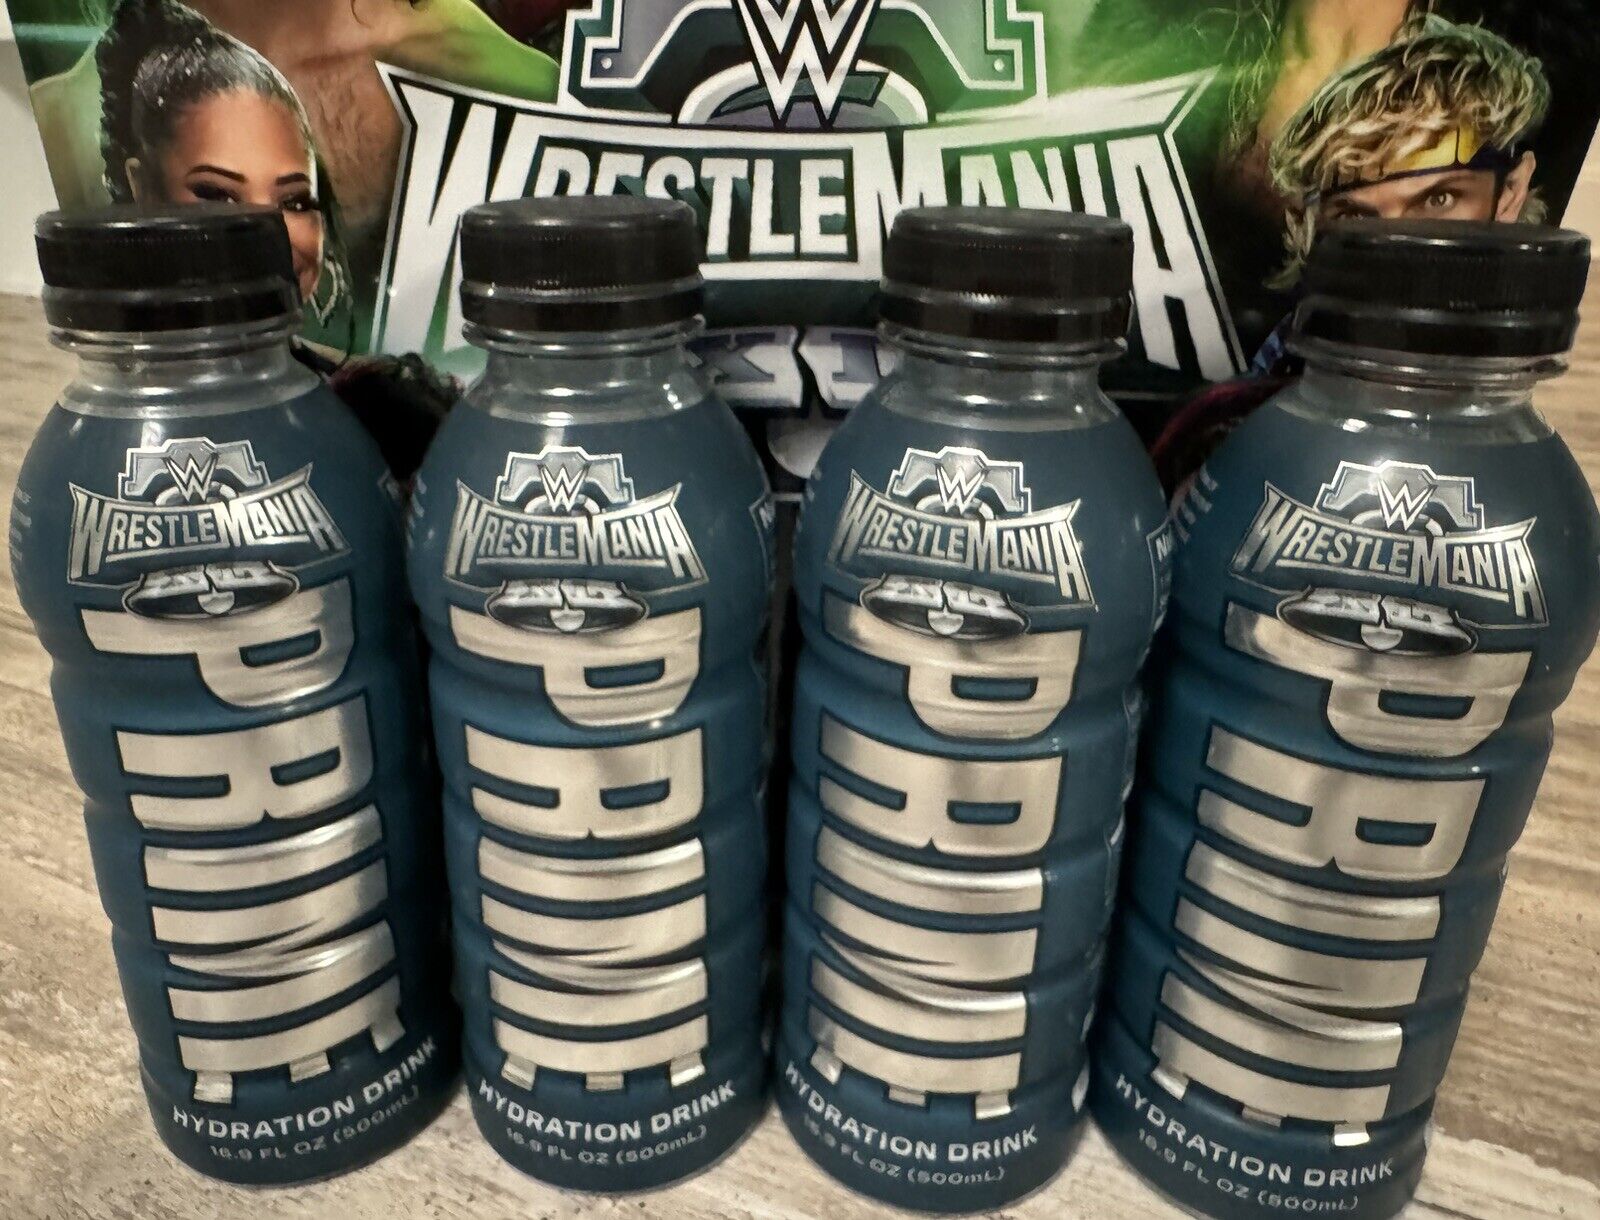 Wrestlemania 40 XL PRIME DRINK-Exclusive Limited Edition- 1 SEALD New Bottle